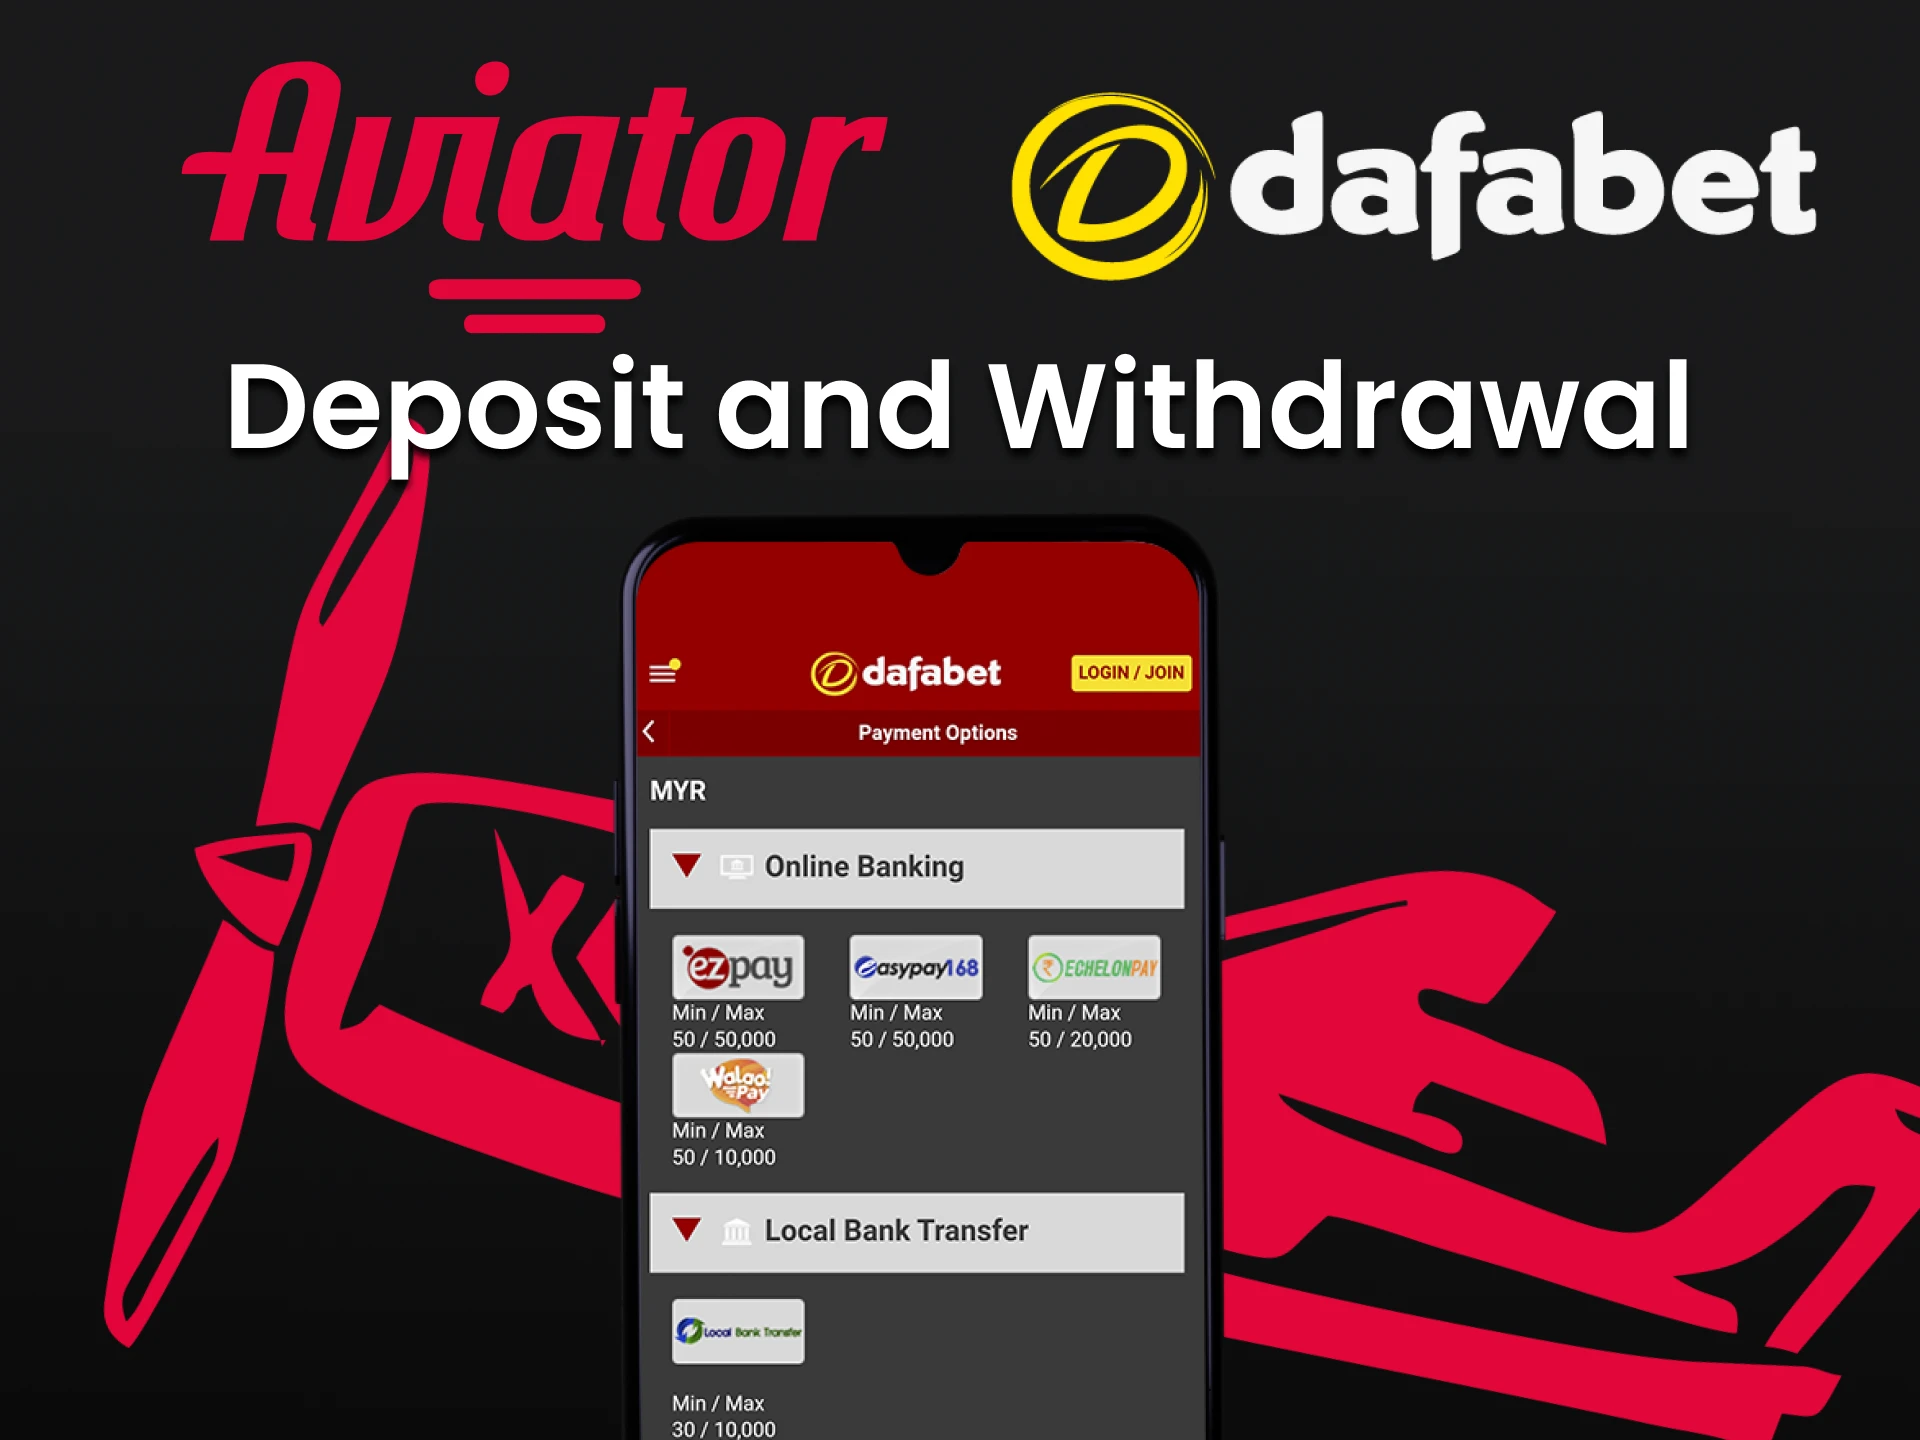 To play Aviator, use the deposit methods from Dafabet.